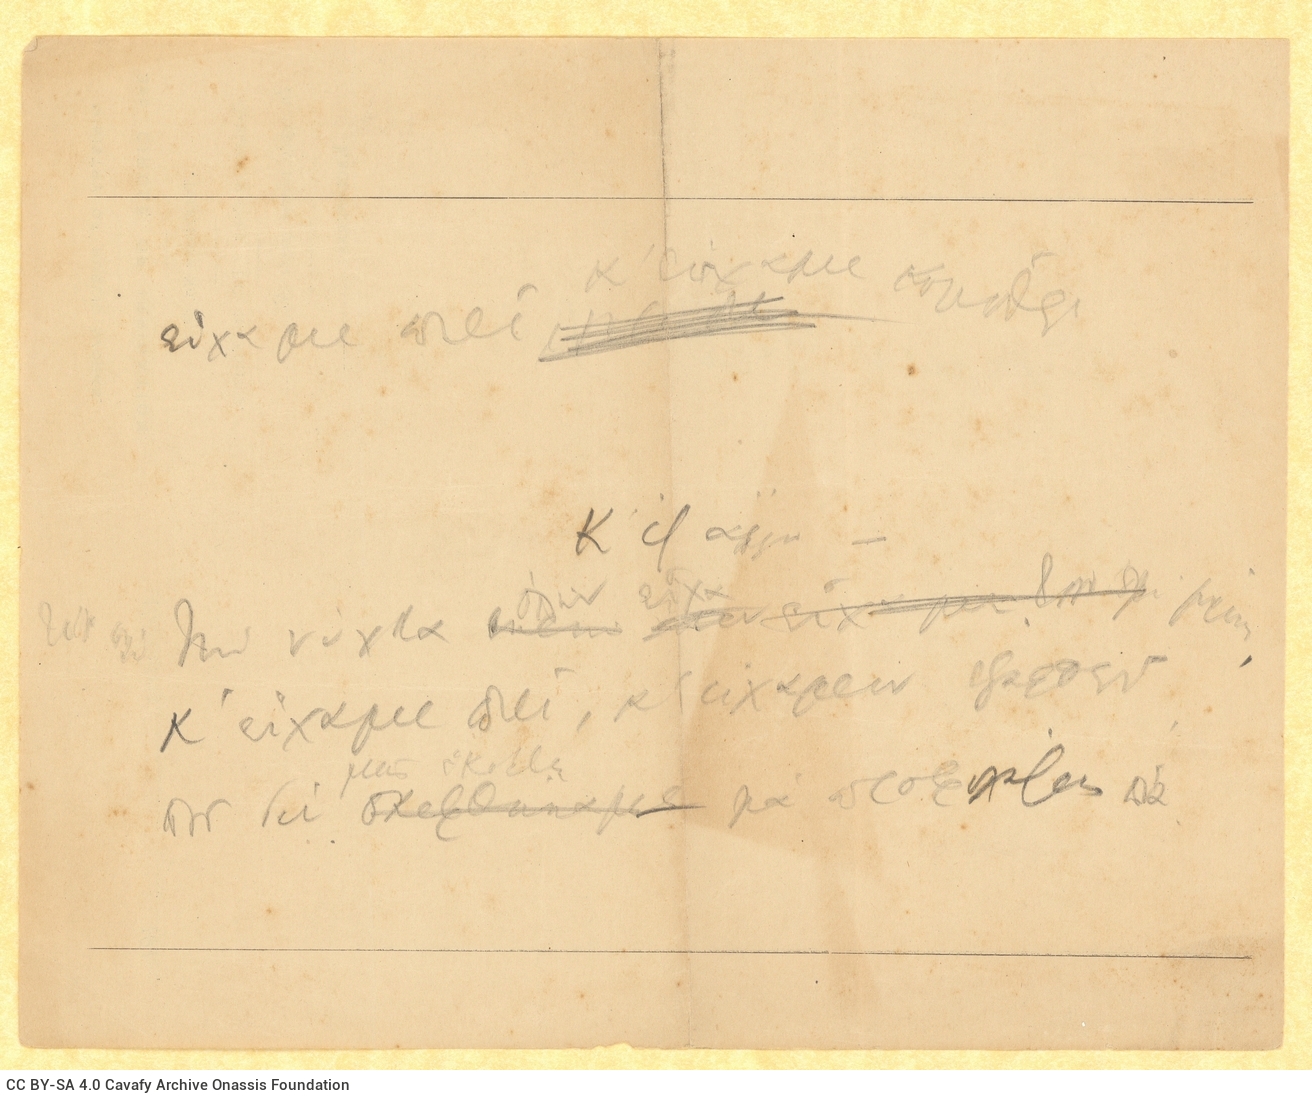 Handwritten notes by Cavafy on both sides of a letterhead of the Ministry of Public Works, Alexandria. The verse "We were 